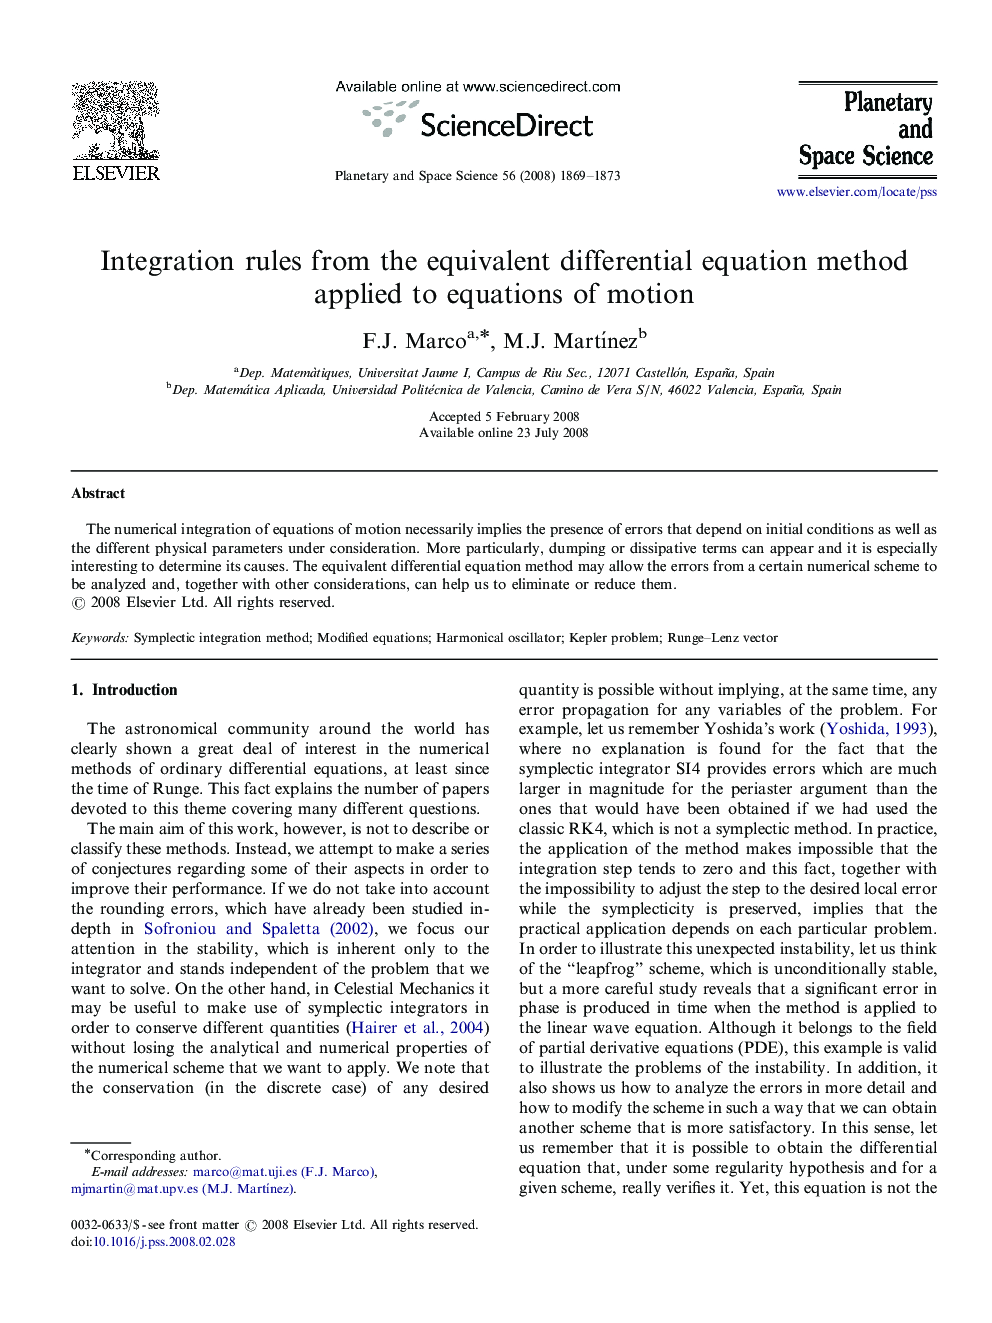 Integration rules from the equivalent differential equation method applied to equations of motion